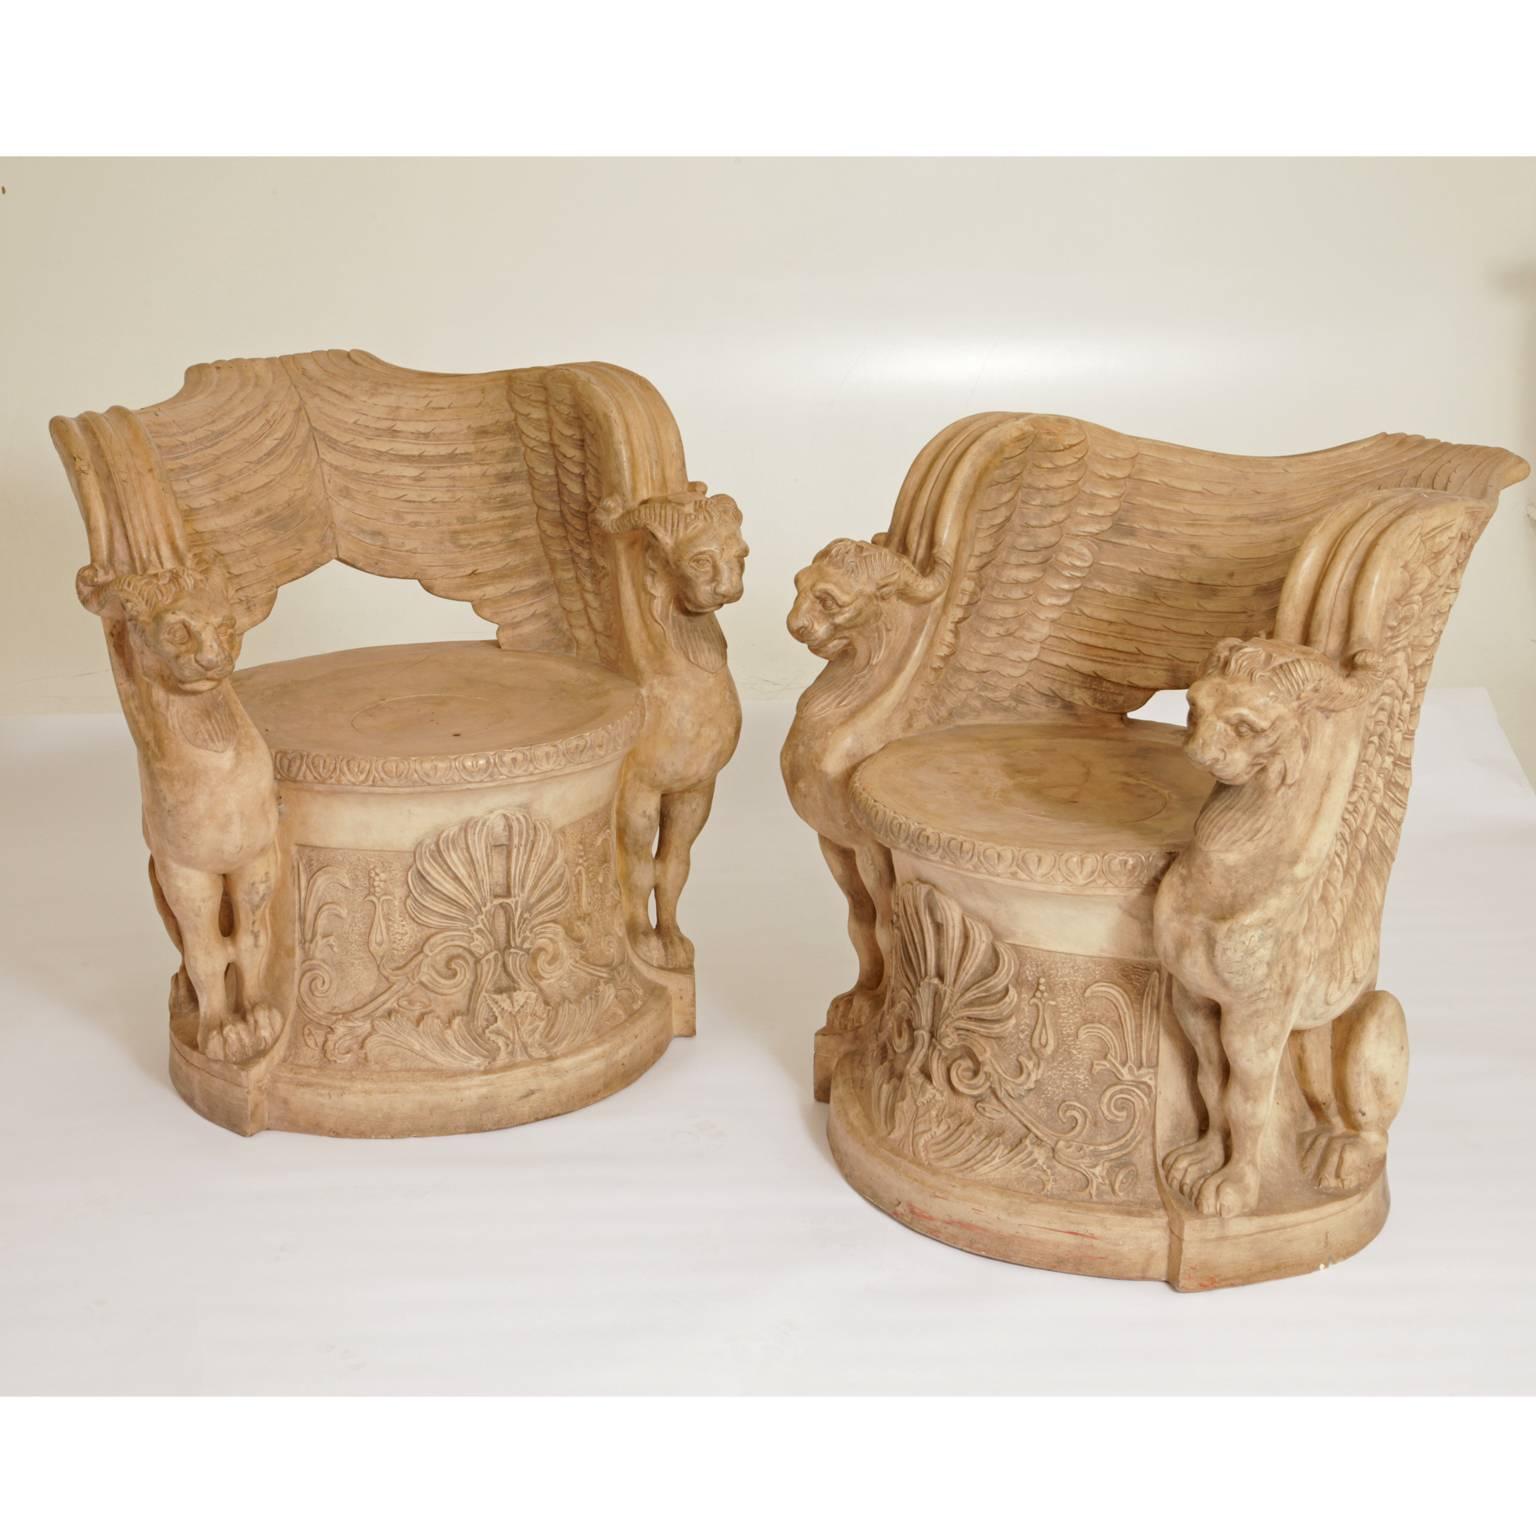 Pair of Empire-style terracotta chairs with flanking lion-esque beasts, whose wings turn into the backrests. Stamp on the back of Manifattura di Signa and Made in Italy.